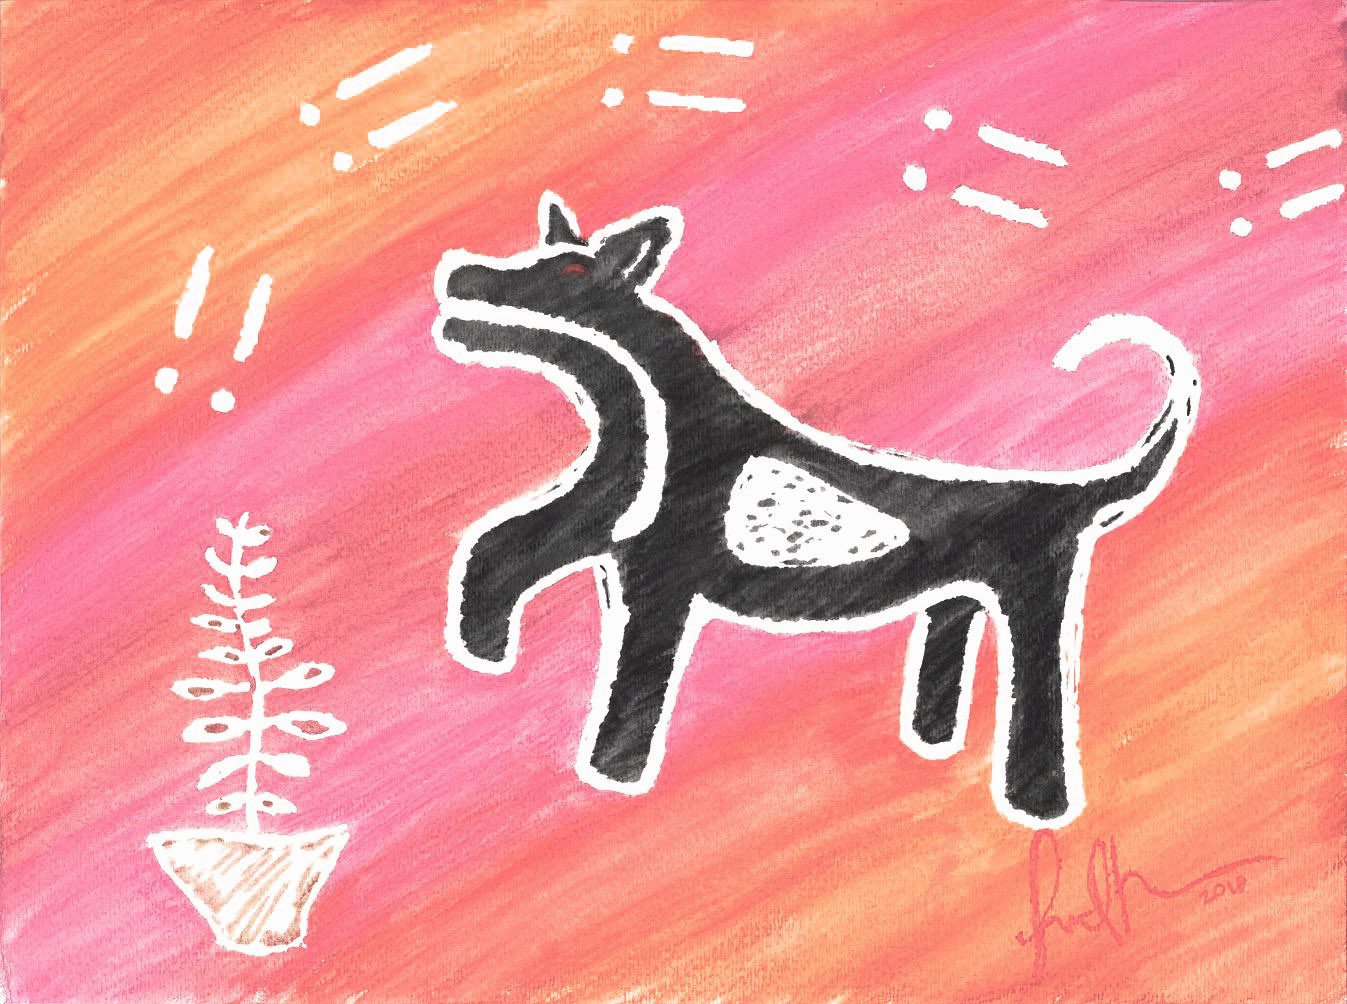 Black petroglyph dog on a pink and orange watercolor background